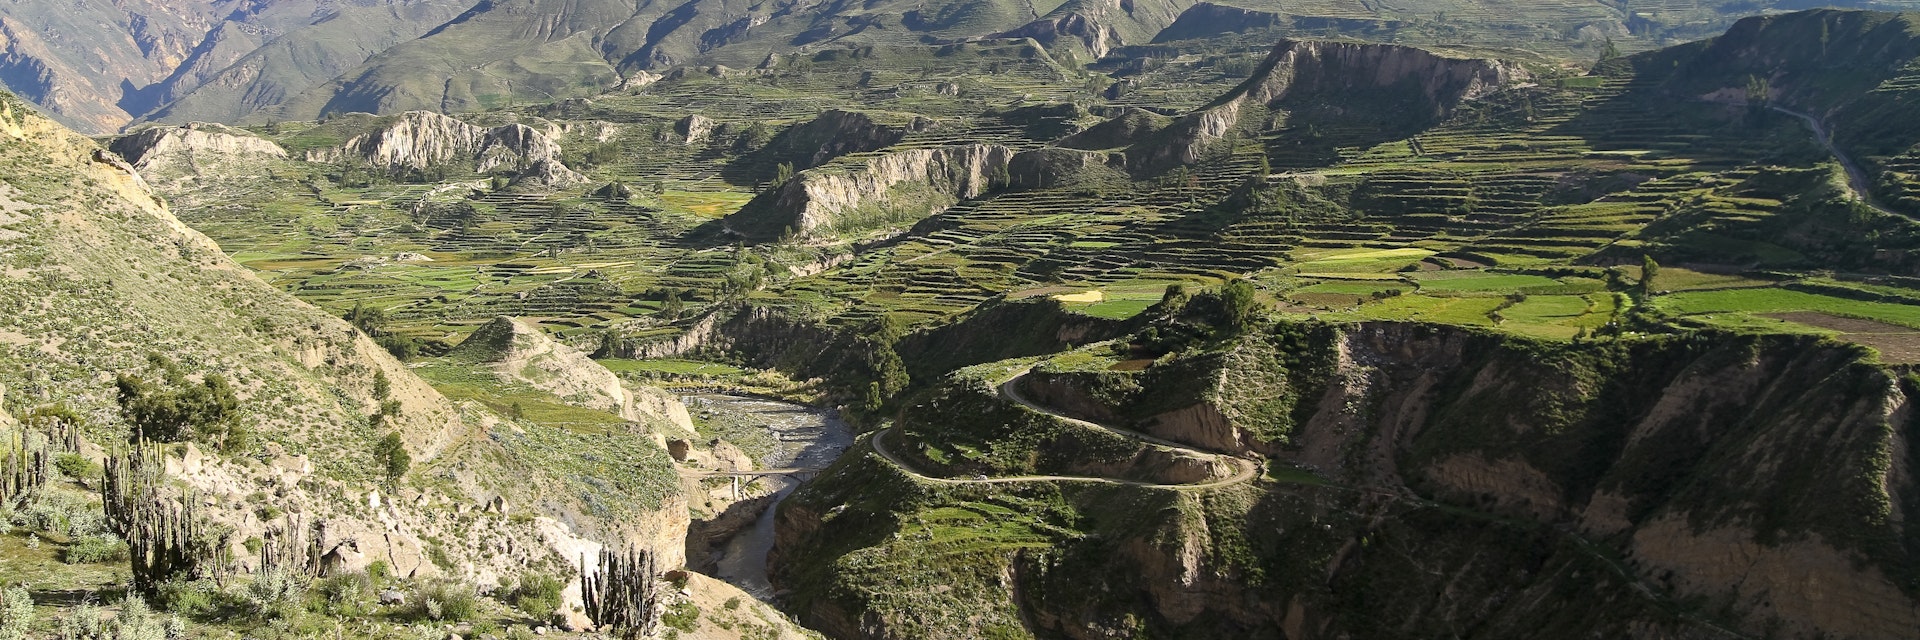 Terraced pastures and mountains in Colca Canyon.